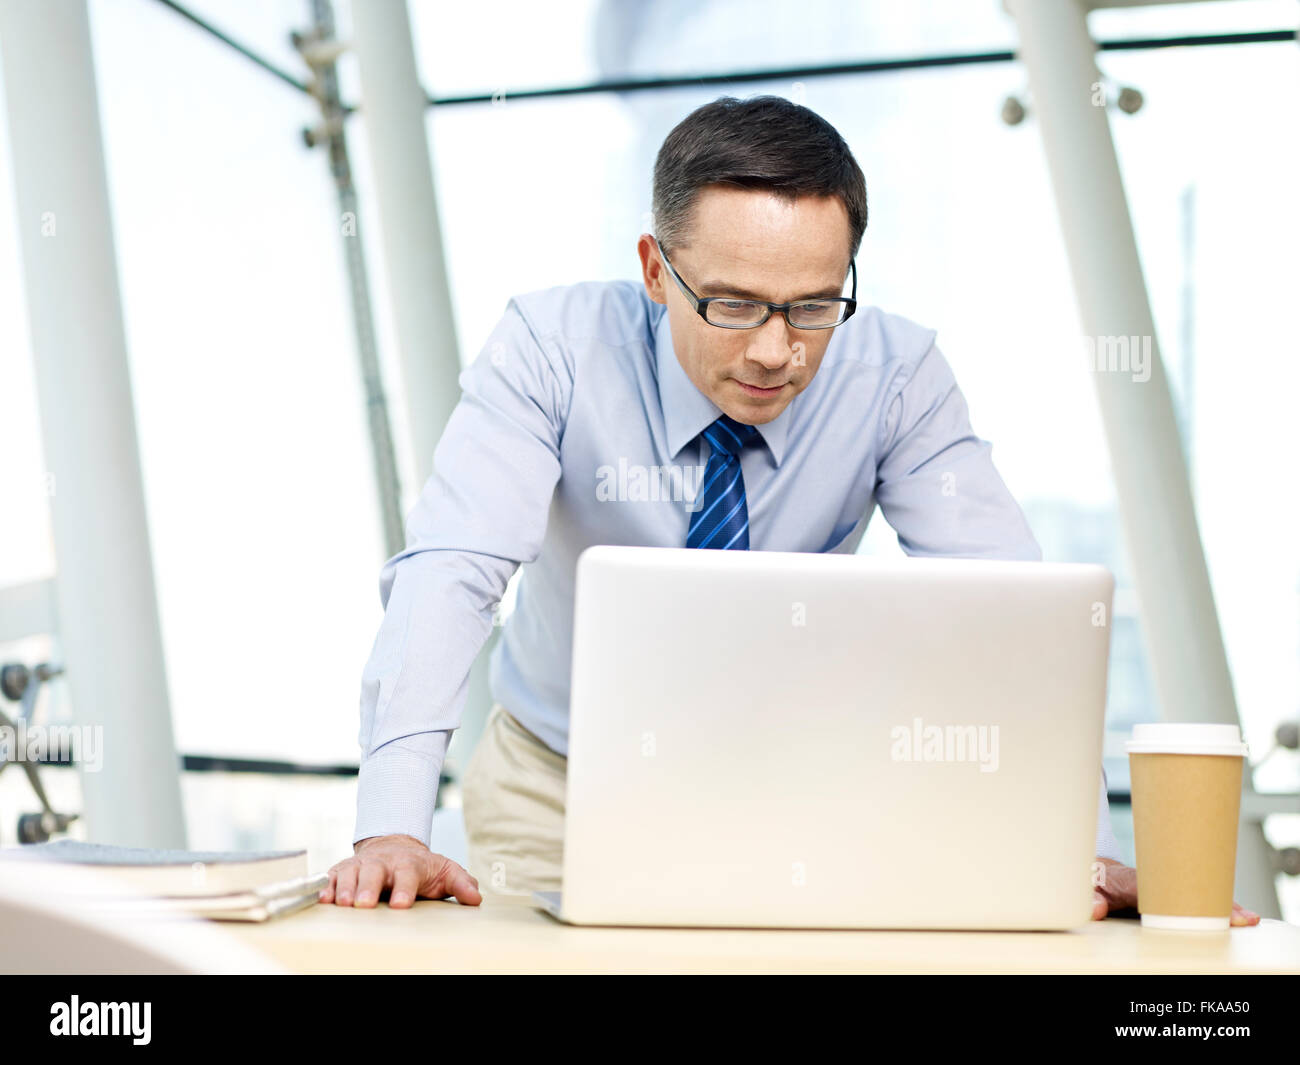 corporate person working in office Stock Photo